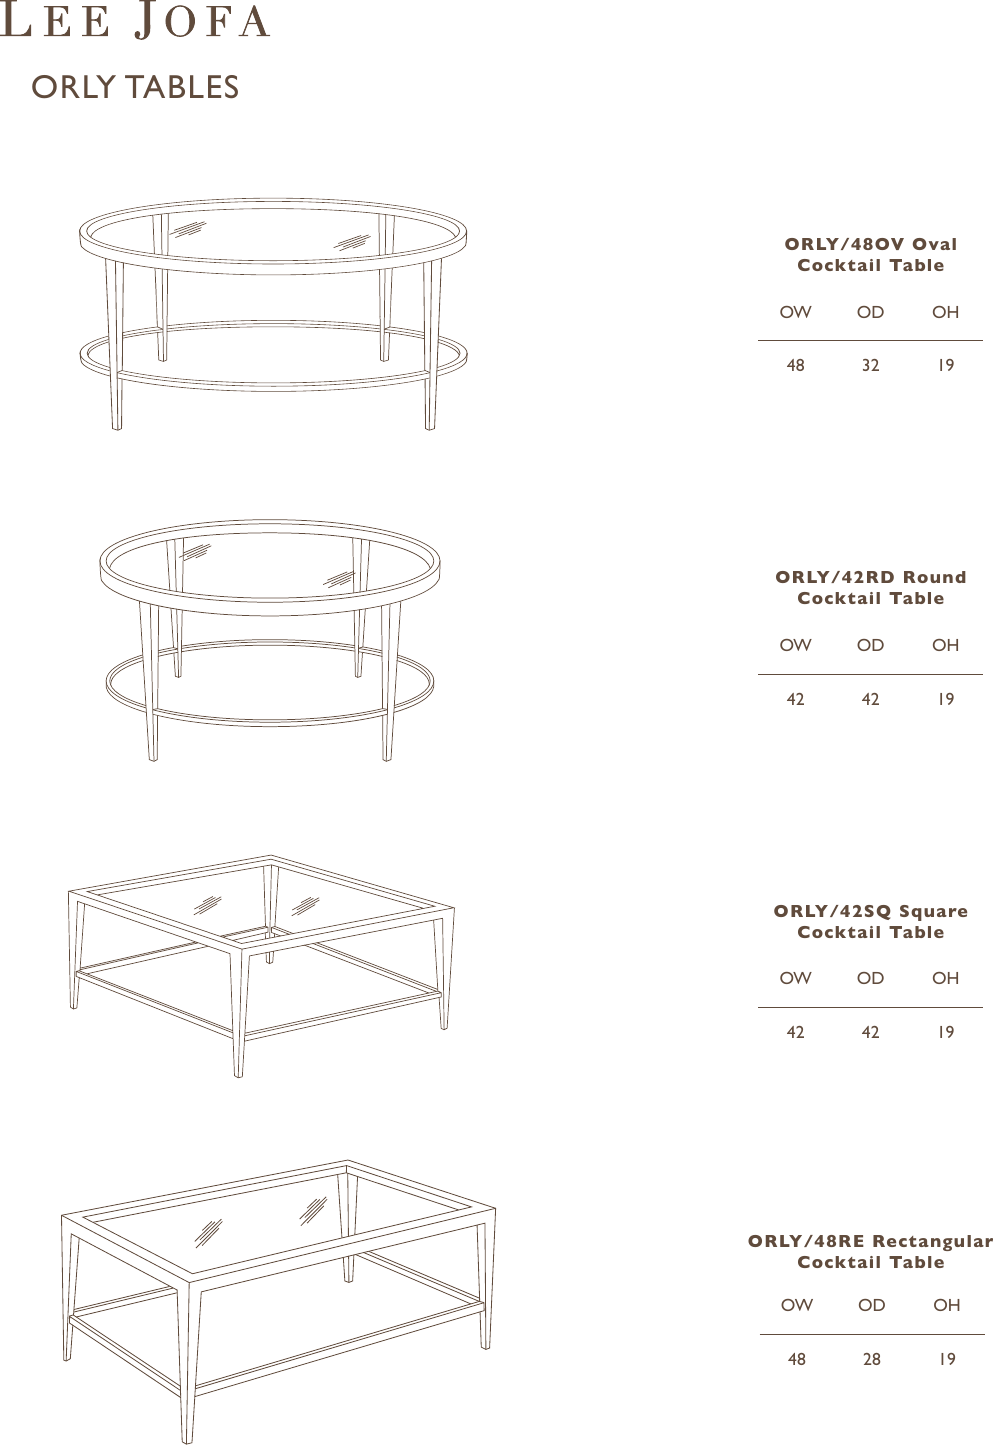 Page 2 of 2 - Lee Jofa Orly Cocktail Table Tearsheet